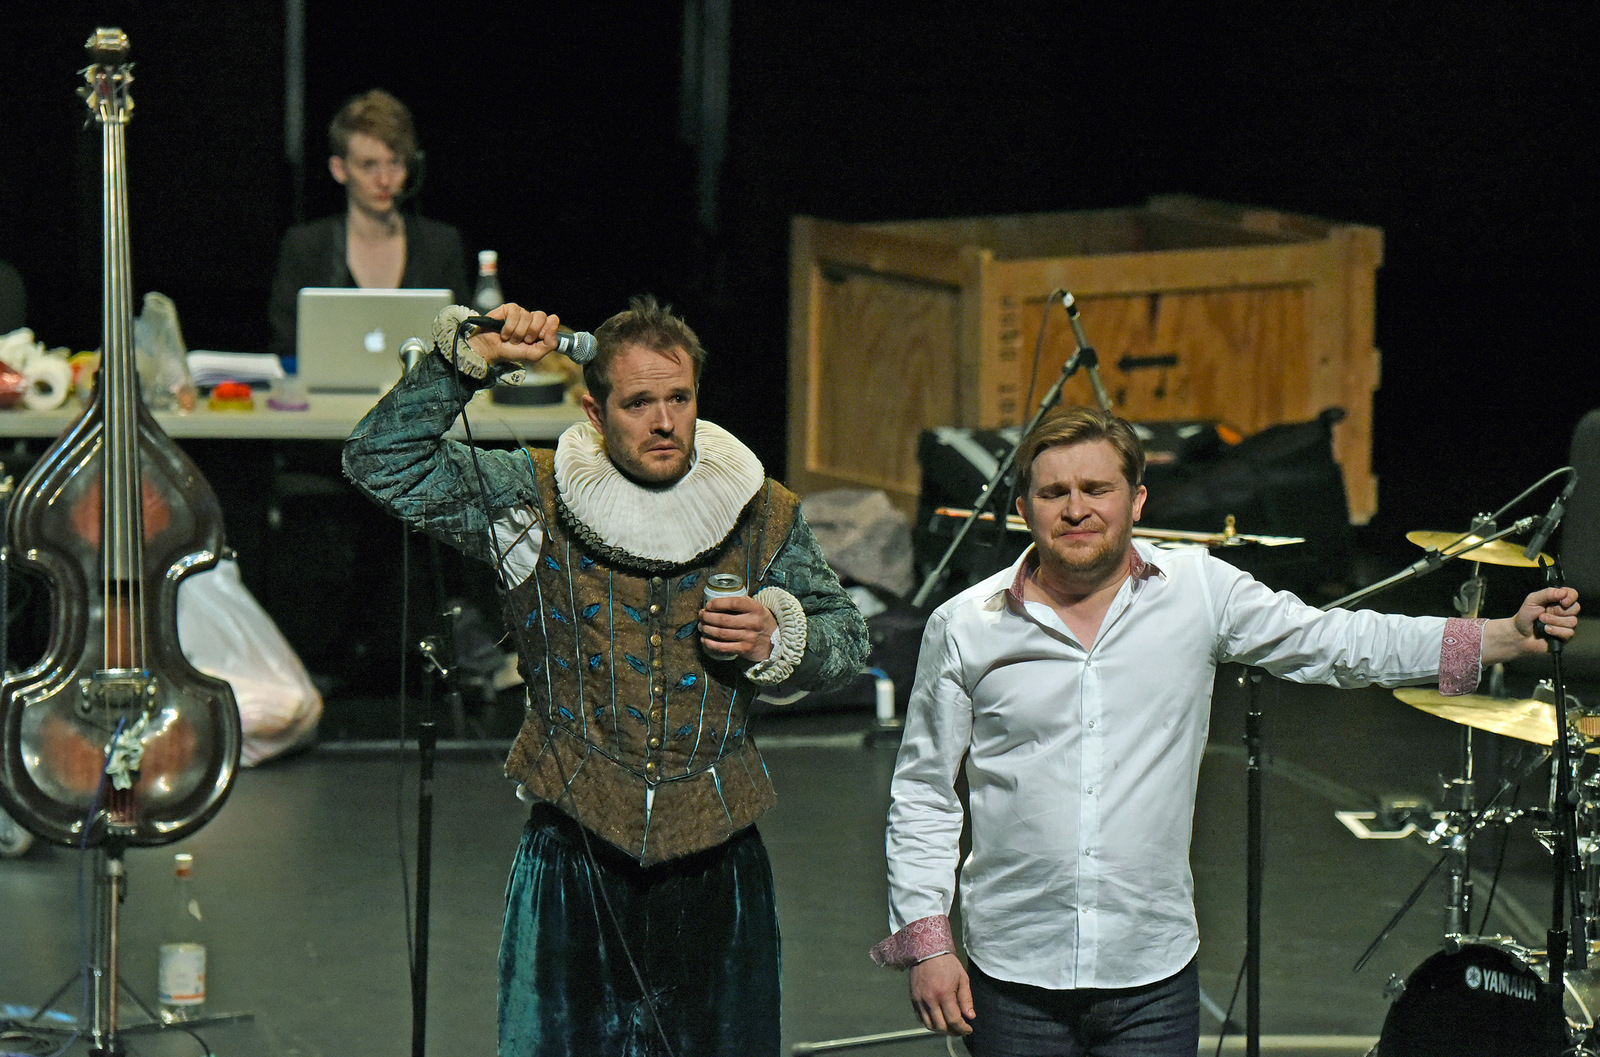 Filter Theatre in association with the Royal Shakespeare Company’s Twelfth Night. Pictured (l-r): Oliver Dimsdale and Jonathan Broadbent. Photo 